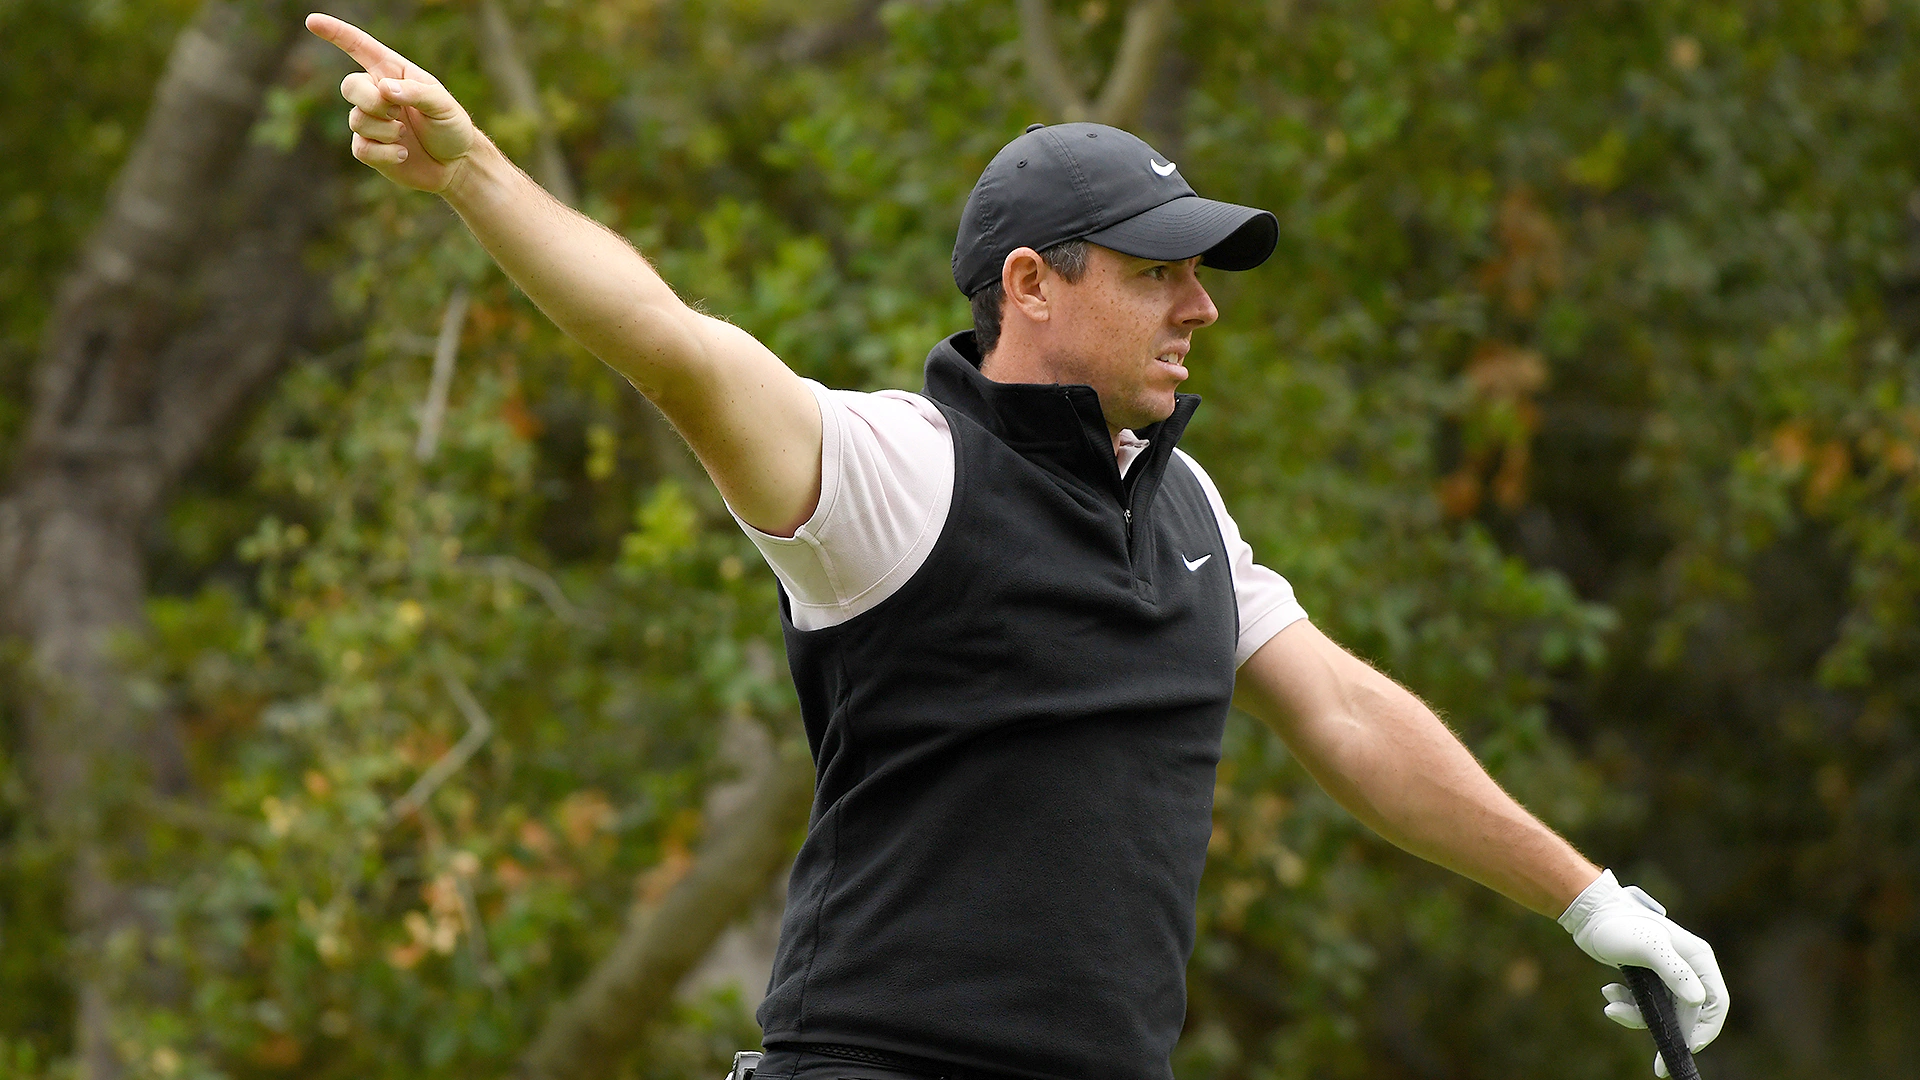 With Masters next on his schedule, Rory McIlroy aims to limit mistakes